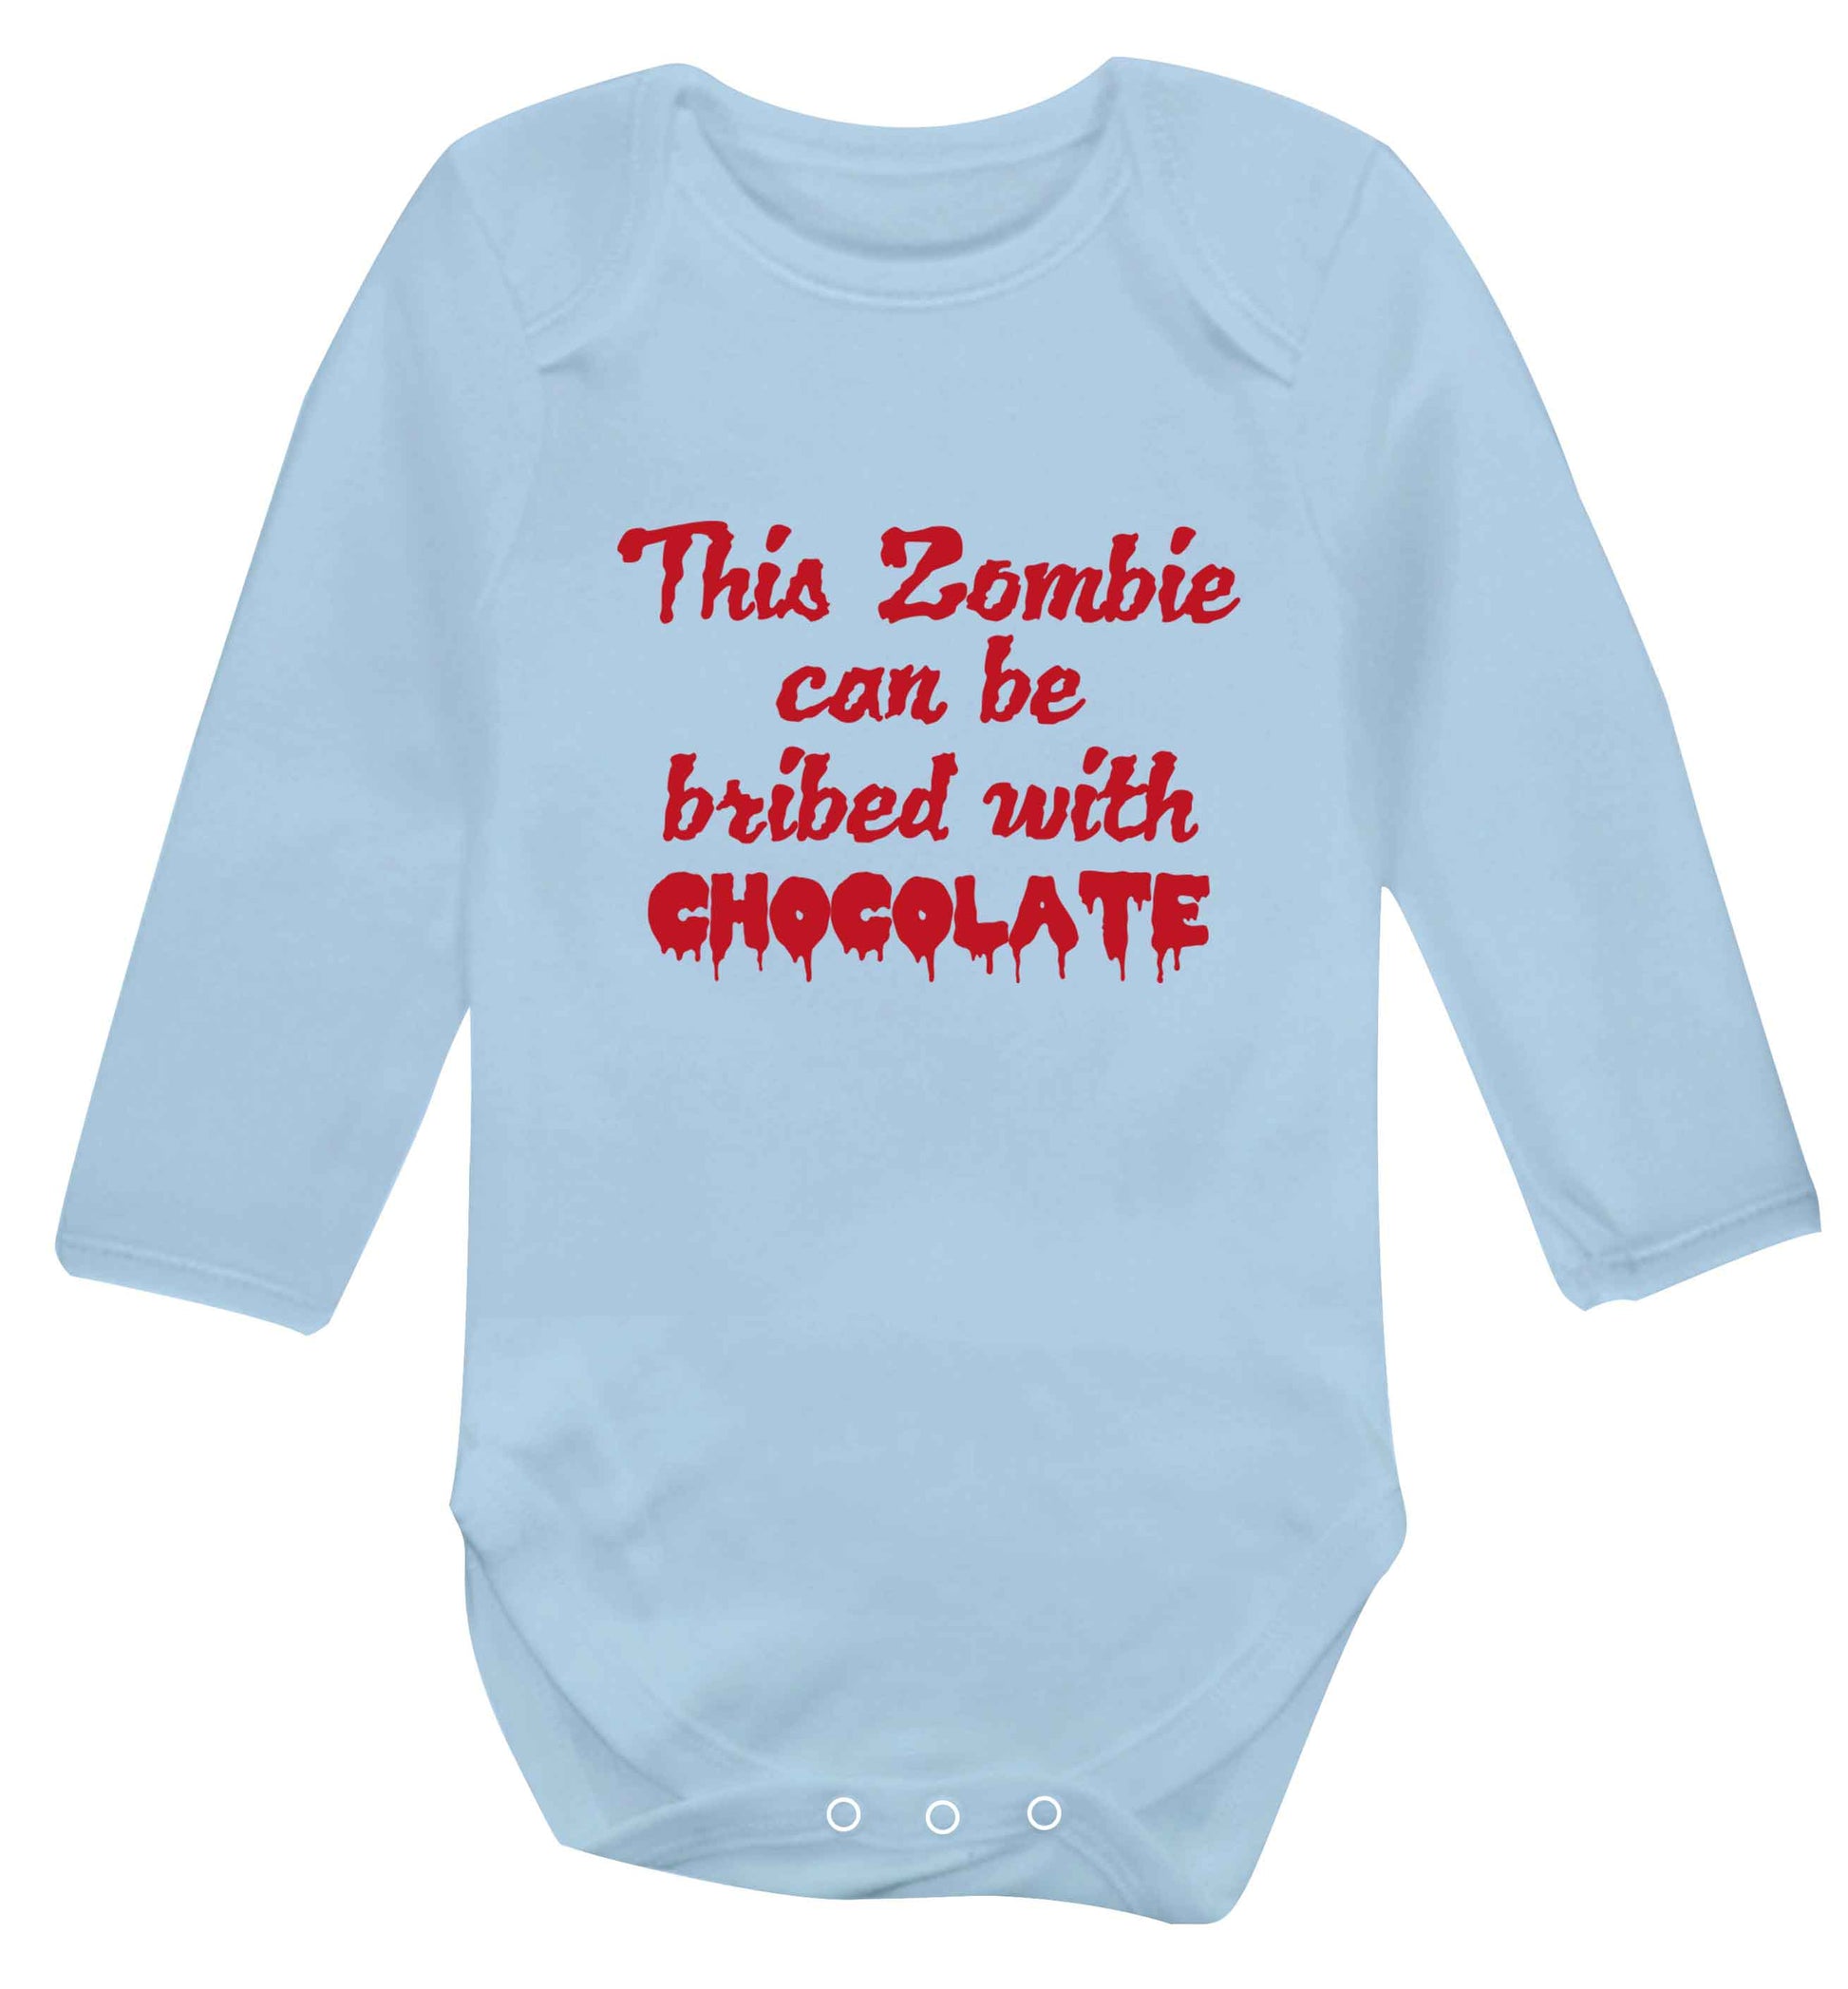 This zombie can be bribed with chocolate baby vest long sleeved pale blue 6-12 months